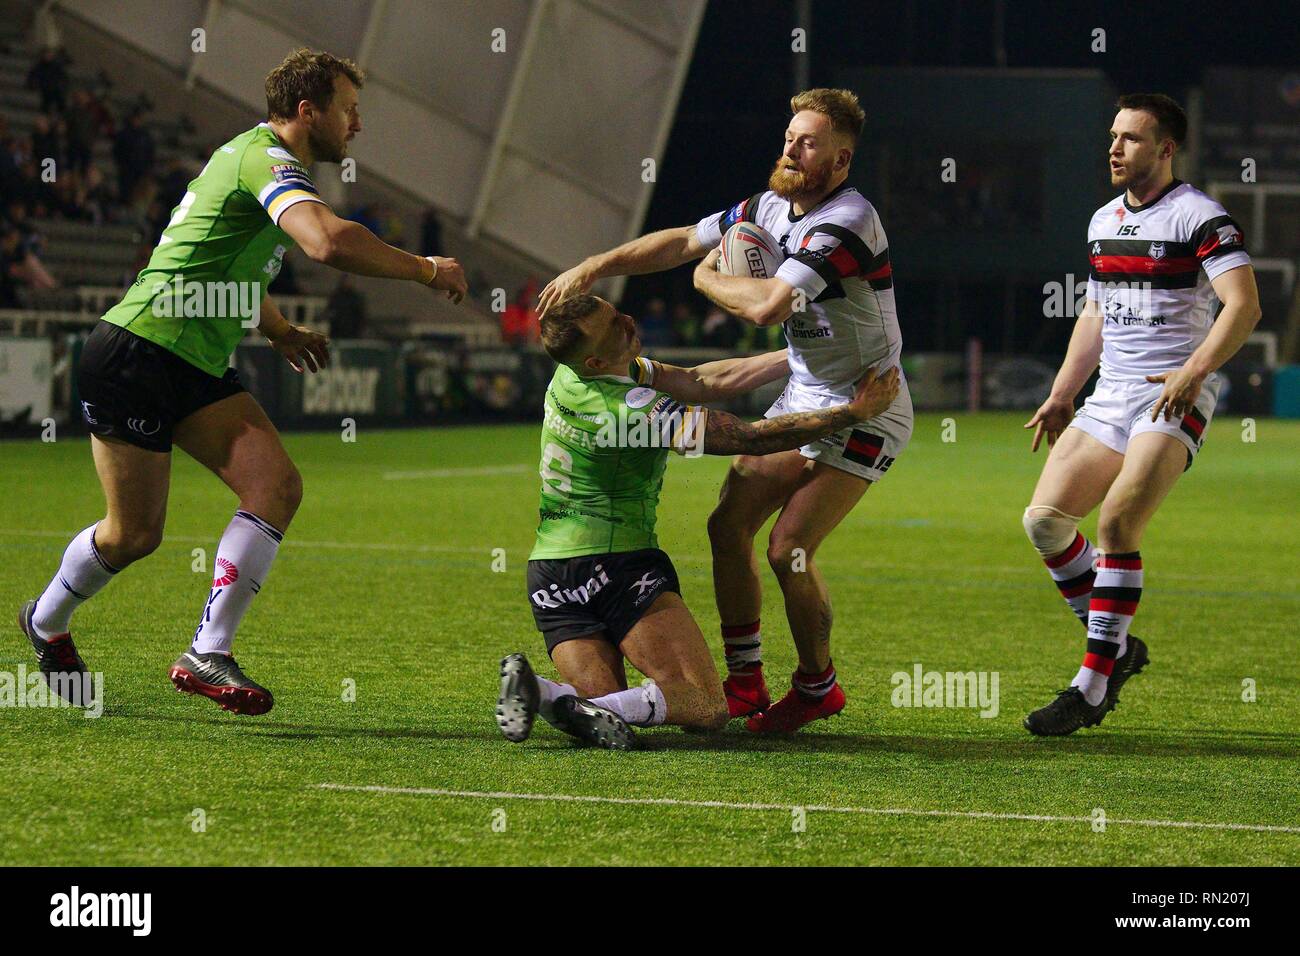 Newcastle upon Tyne, England, 16 February 2019. Danny Craven of Widnes Vikings attempting to tackle Gary Wheeler of Toronto Wolfpack during their Betfred Championship match at Kingston Park, Newcastle upon Tyne. Credit: Colin Edwards/Alamy Live News. Stock Photo